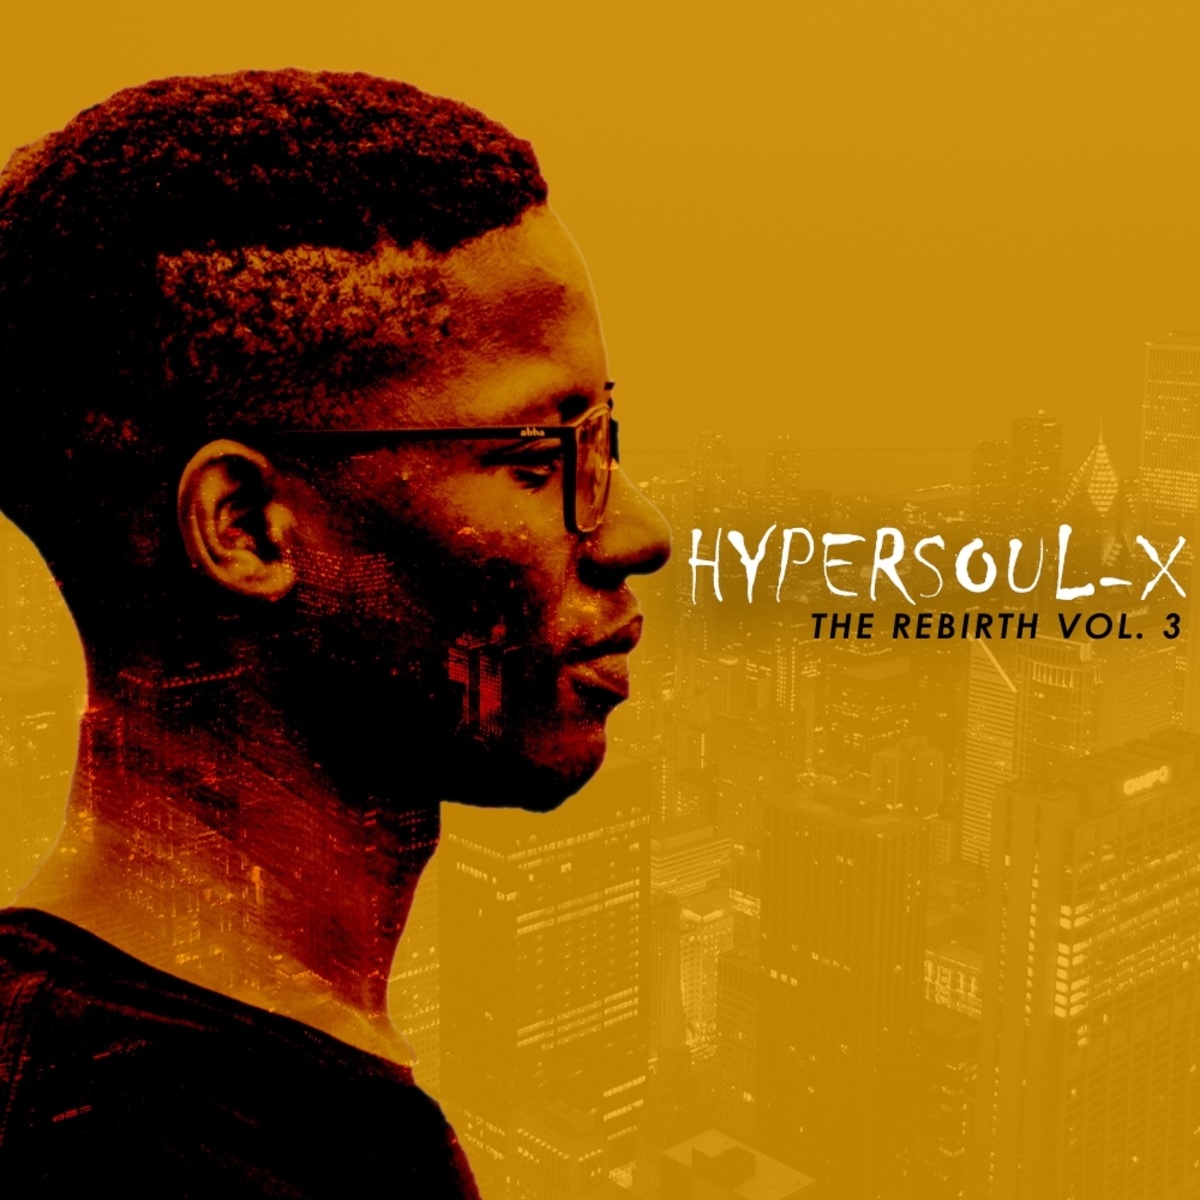 HyperSOUL-X - The Rebirth, Vol. 3 / Hyper Production (SA)